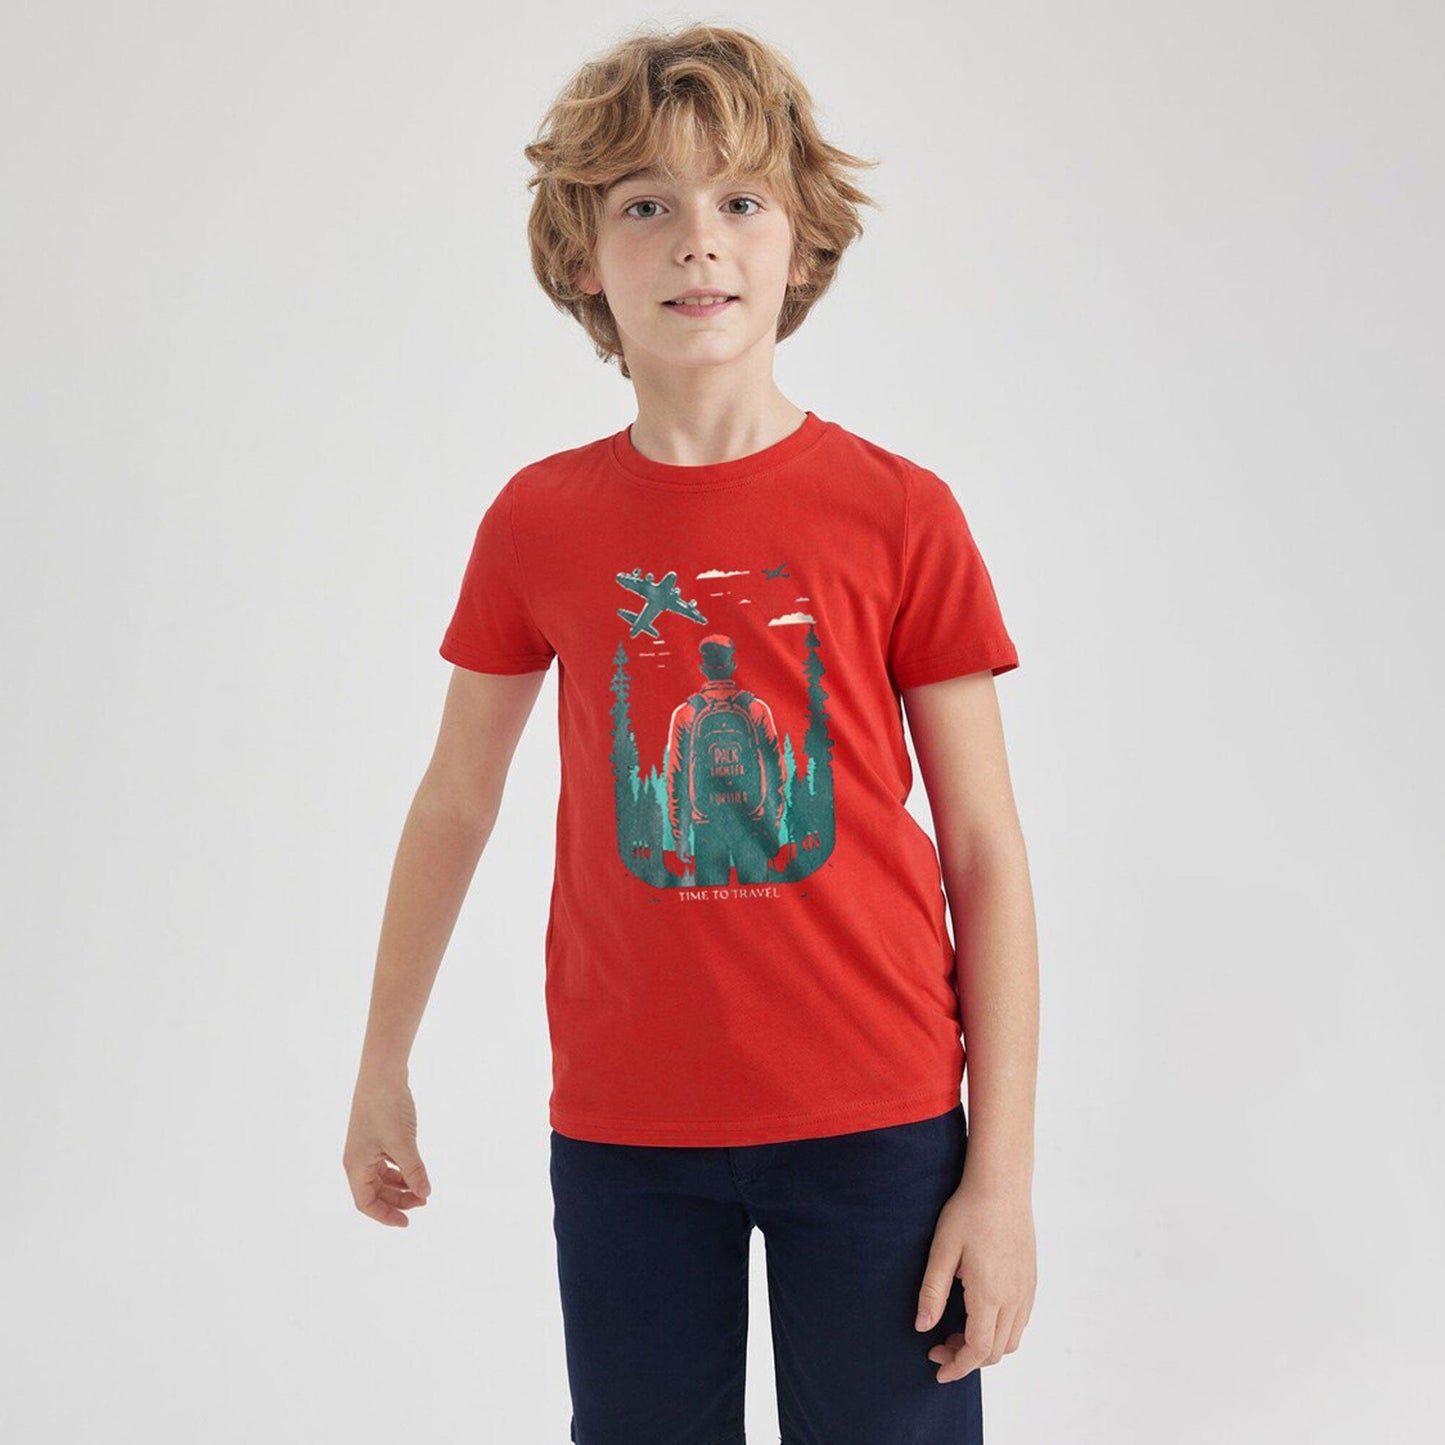 Polo Republica Boy's Time To Travel Printed Tee Shirt Boy's Tee Shirt Polo Republica Red 1-2 Years 